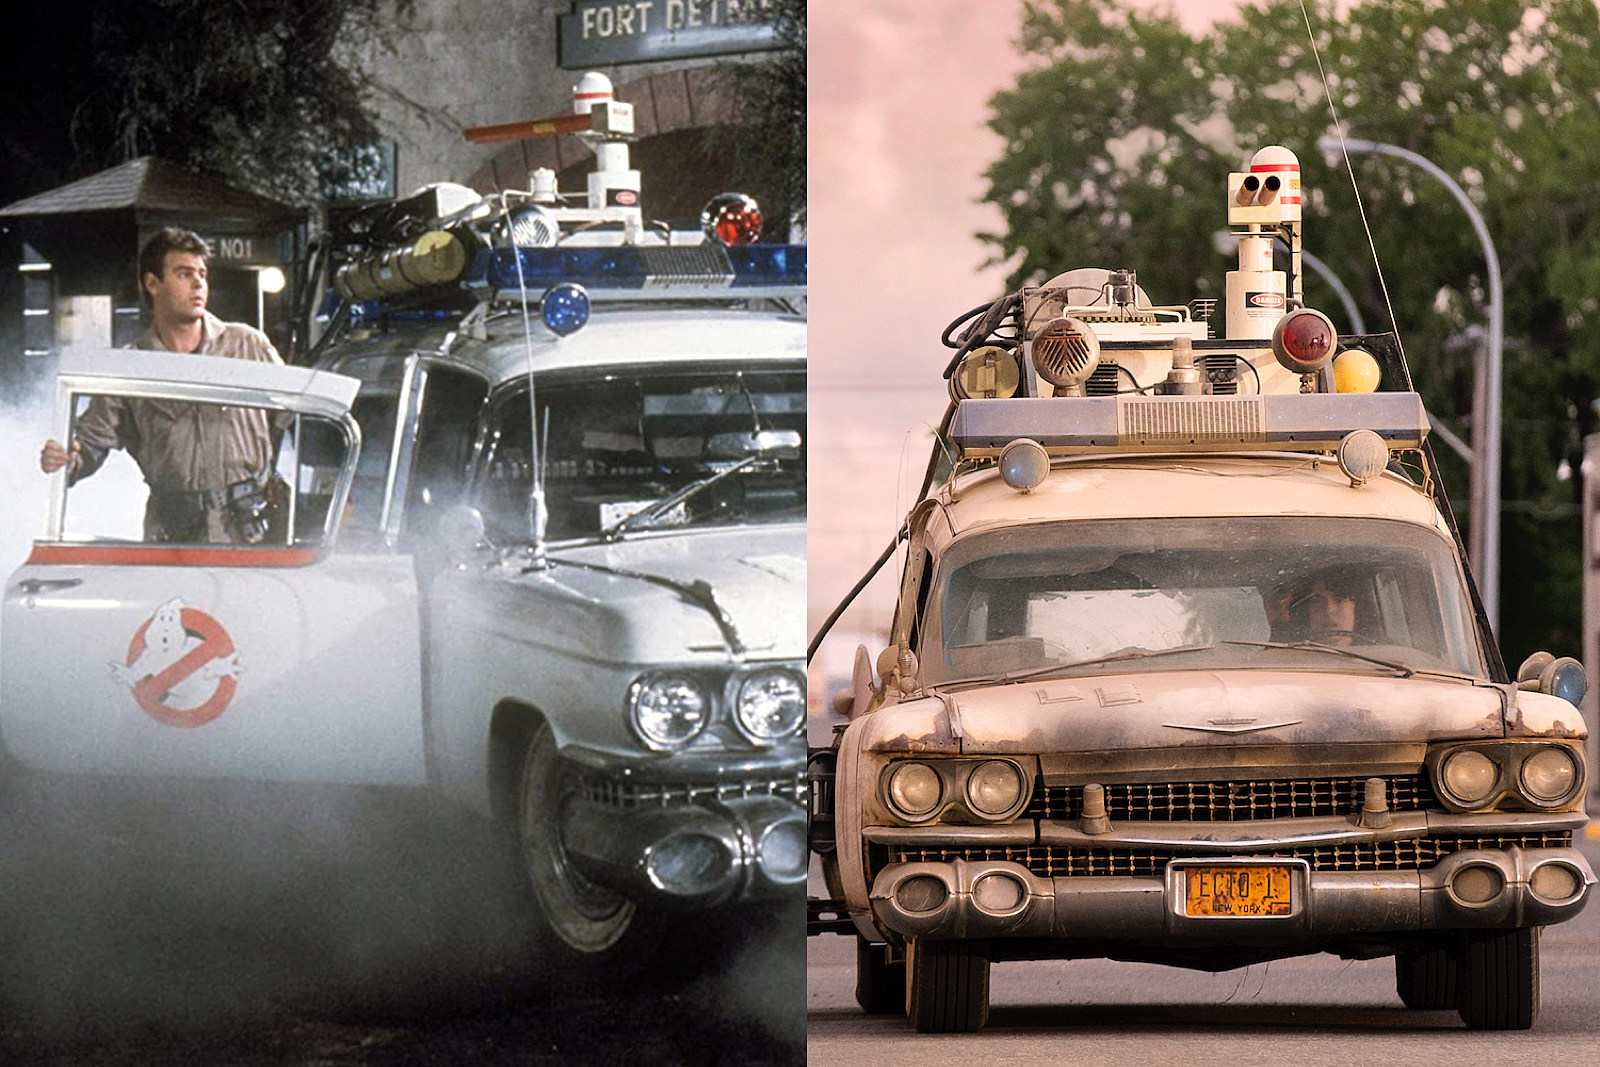 Why Ghostbusters: Afterlife Didn't Bring Back The Original Ecto-1